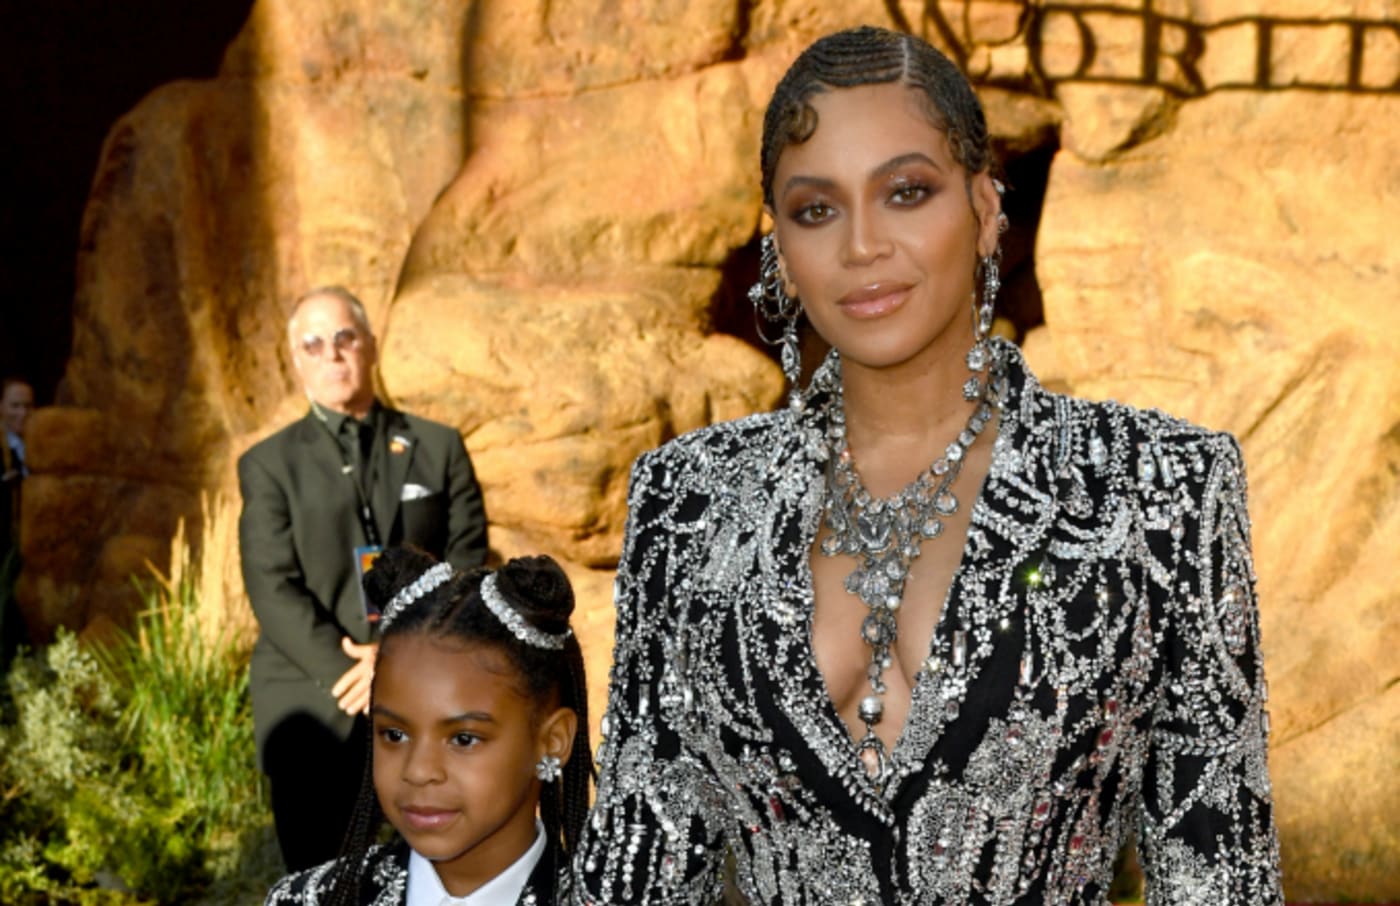 Blue Ivy Carter and Beyoncé attends the premiere of Disney's "The Lion King"